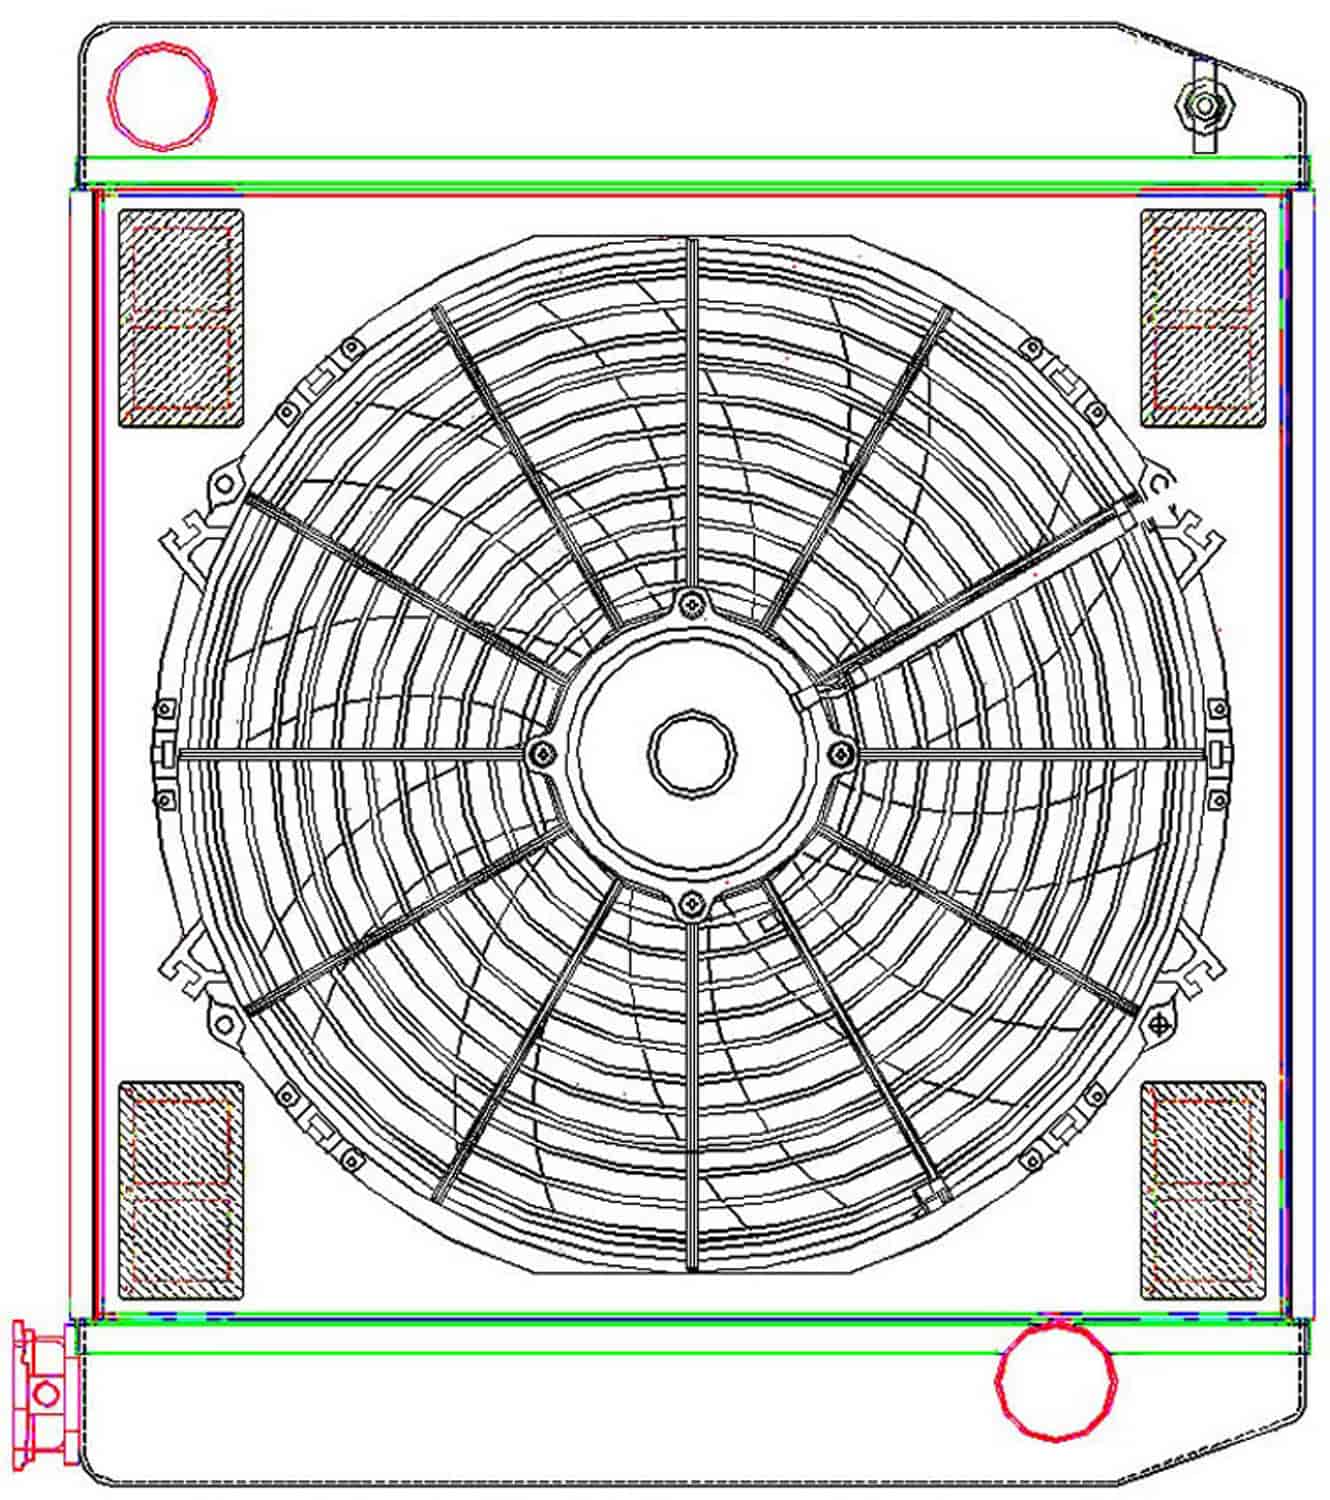 MegaCool ComboUnit Universal Fit Radiator and Fan Single Pass Crossflow Design 22" x 19" with Straight Outlet